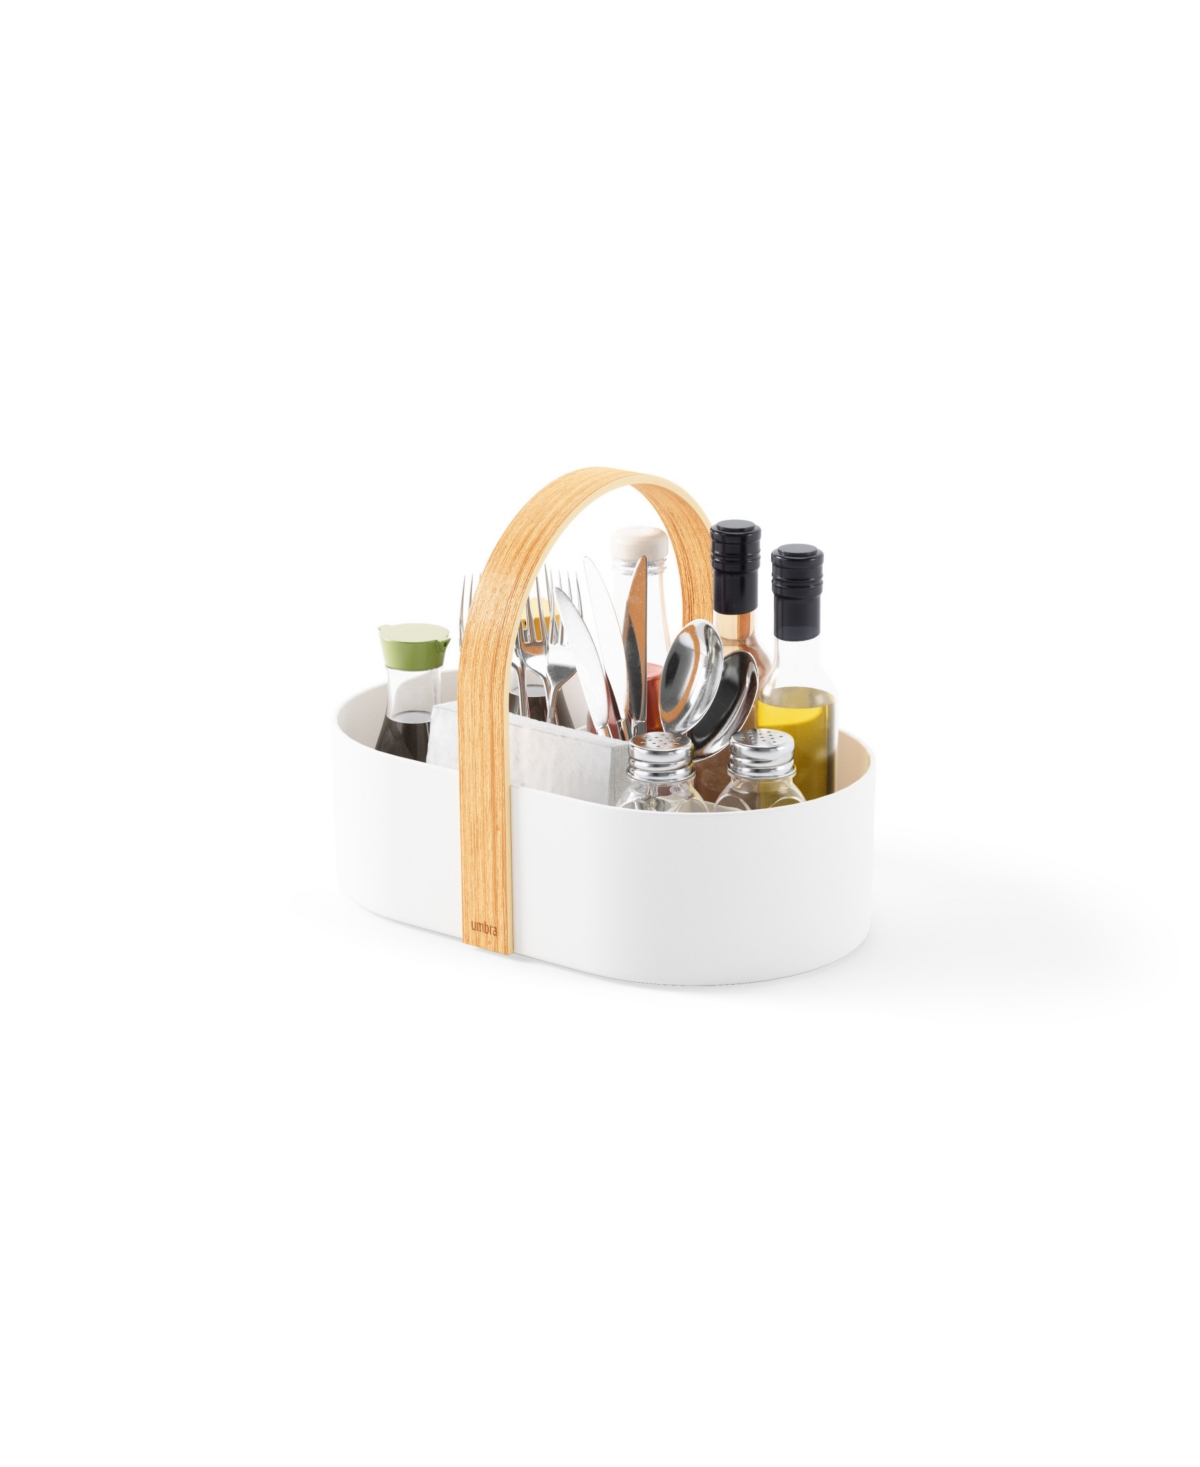 Shop Umbra Bellwood Caddy In White,natural